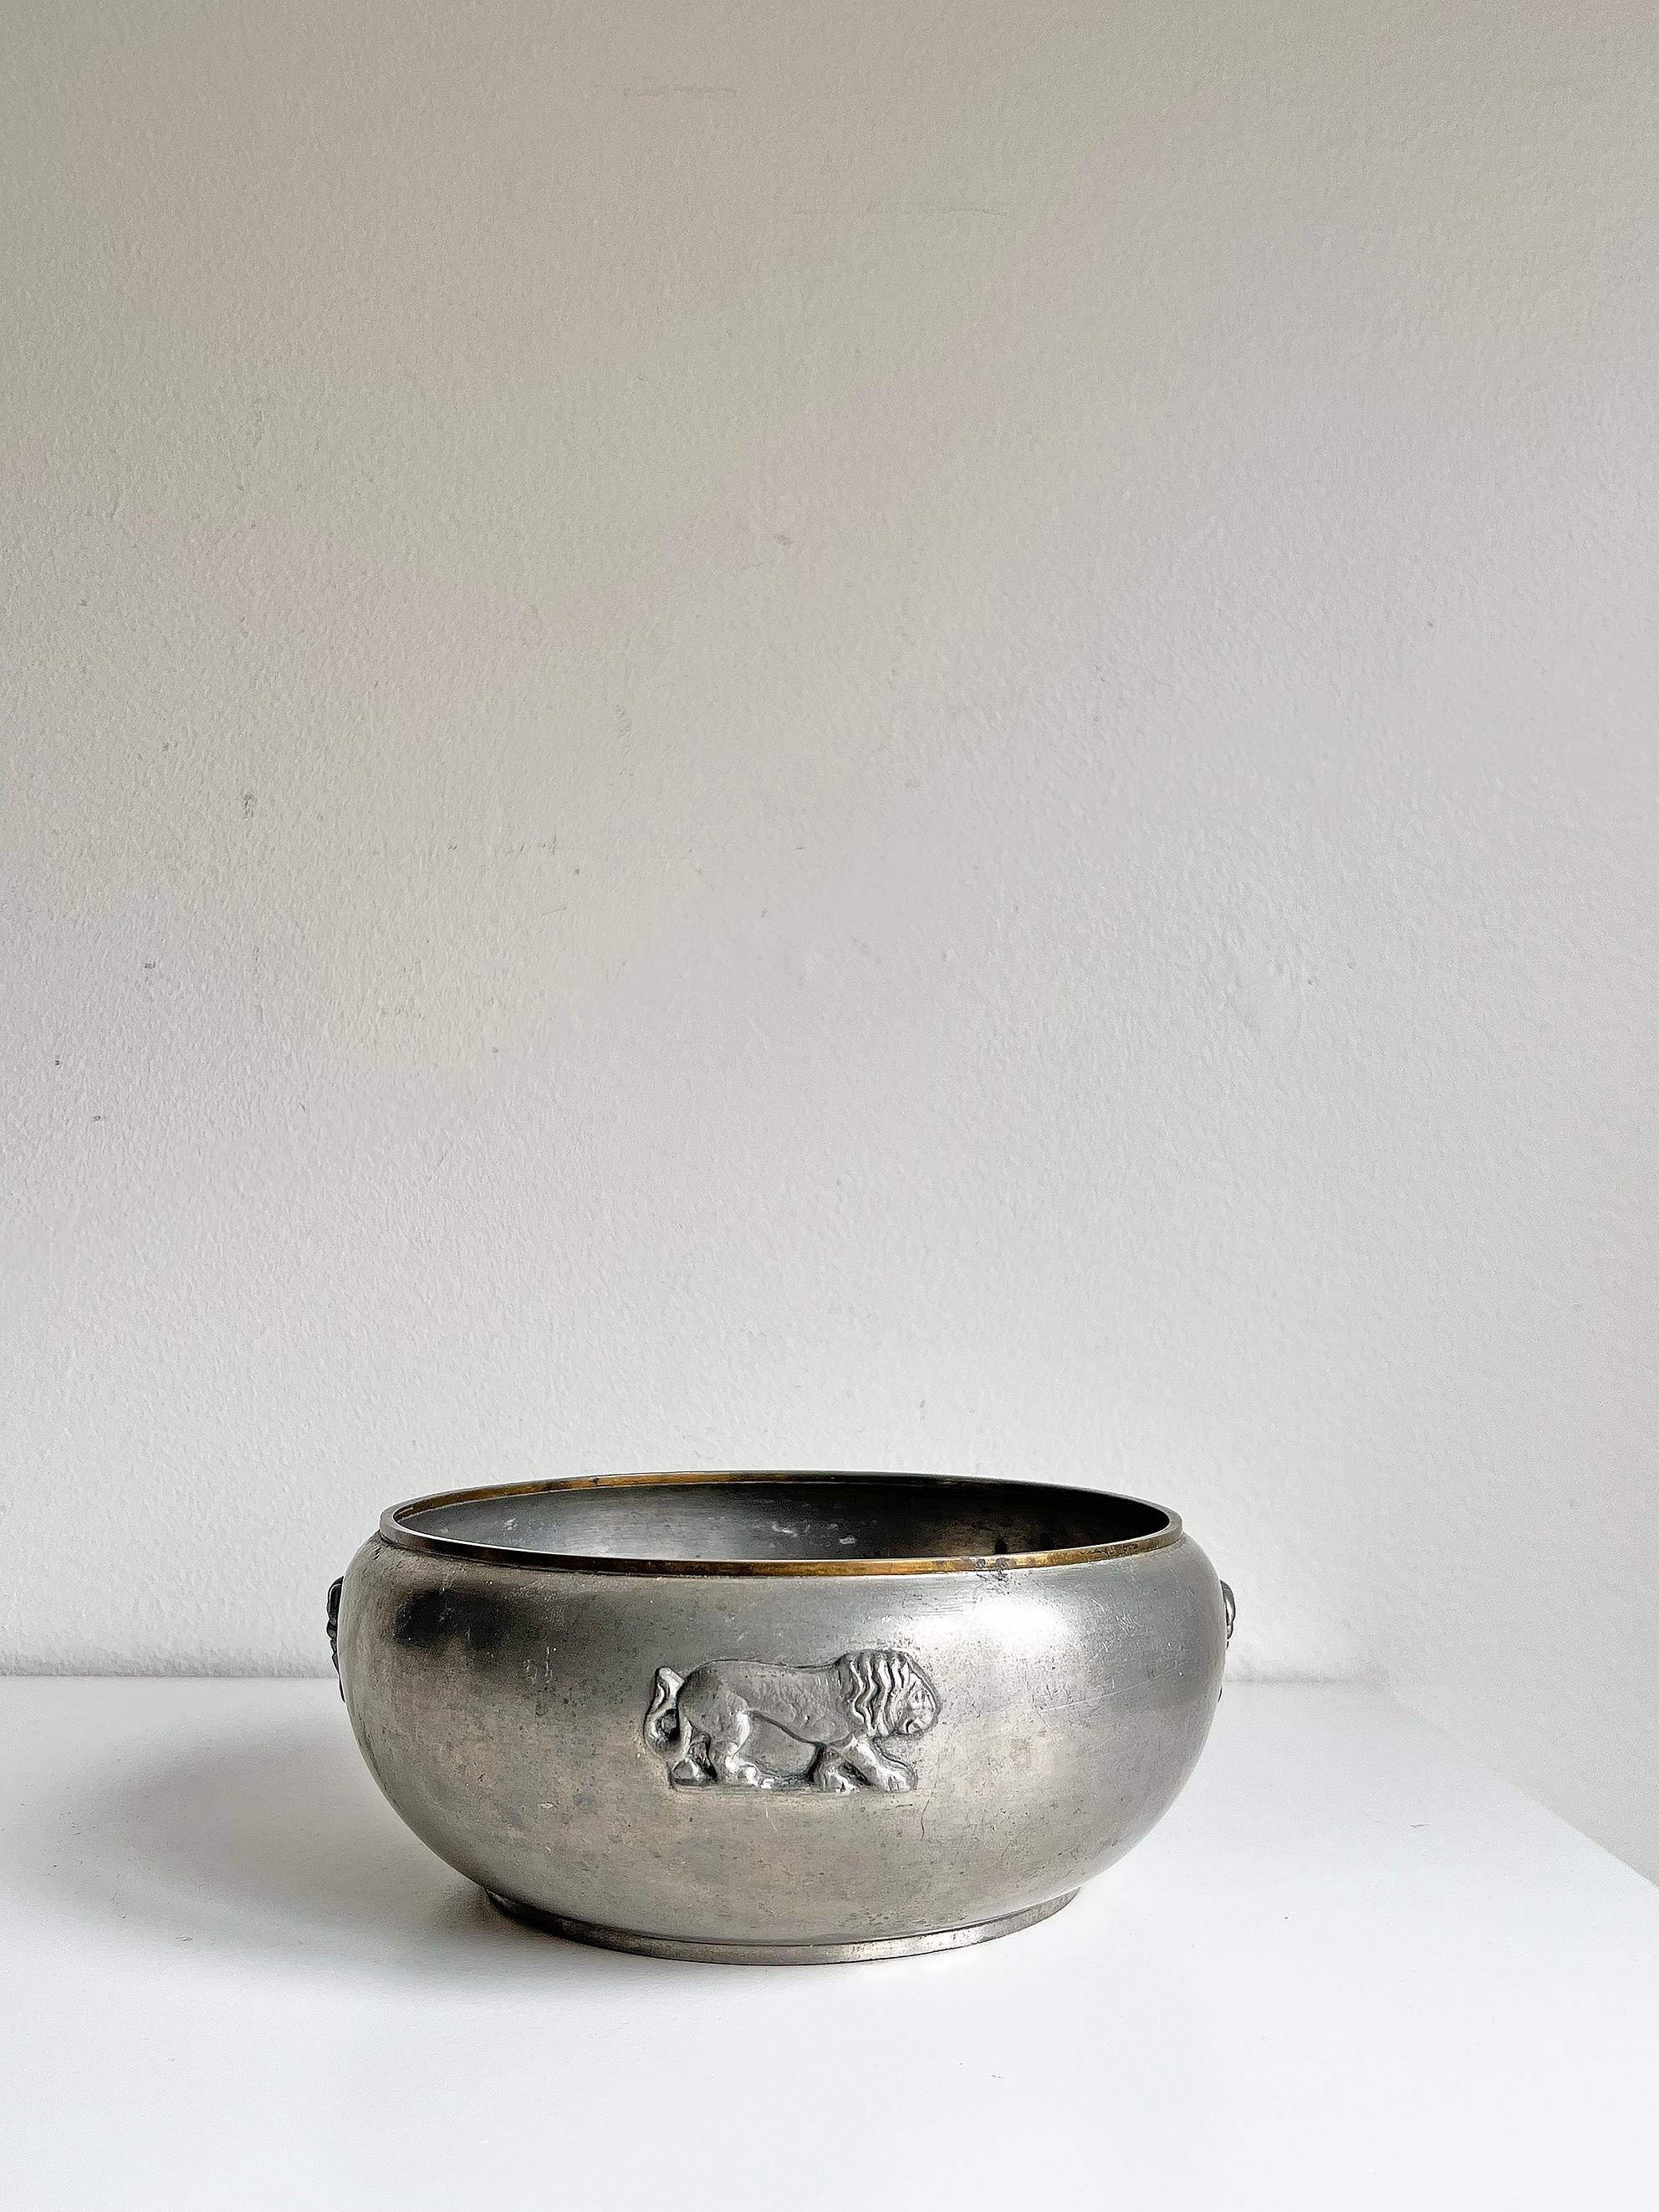 Very rare bowl in pewter with brass rim by GAB -1930.
Lovely piece decorated with lions and palm-trees. 
Signed with makers mark.

Wear consistent with age and use. 
Pewter and brass patina, marks, scratches and dents, uneven base as seen on